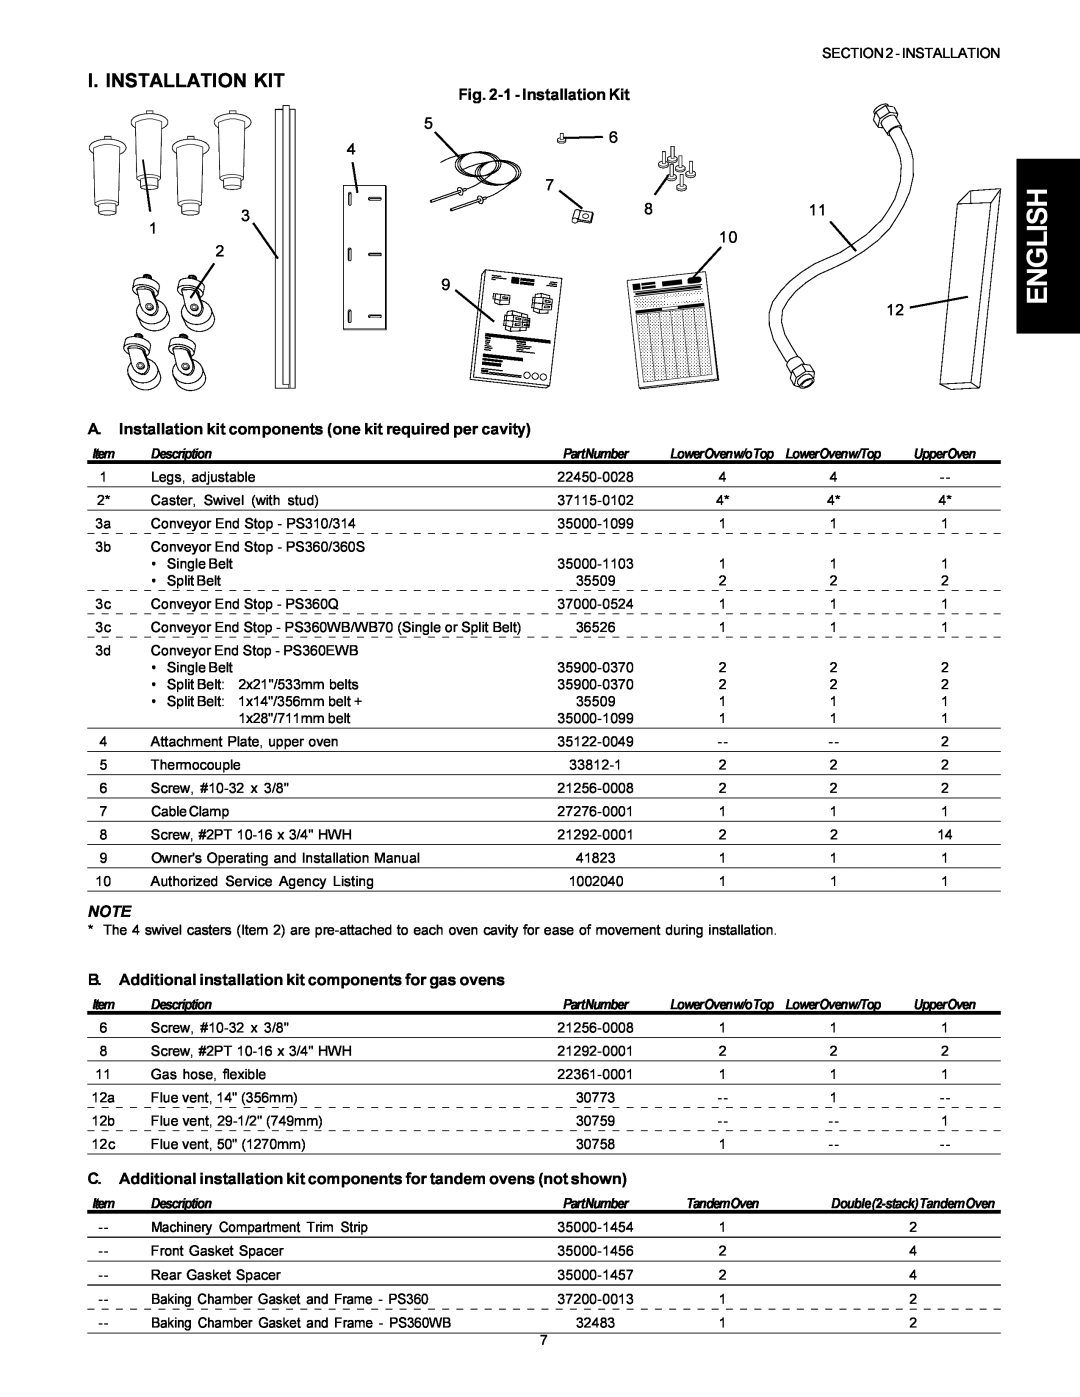 Middleby Marshall PS360 I. Installation Kit, 1 - Installation Kit, B. Additional installation kit components for gas ovens 